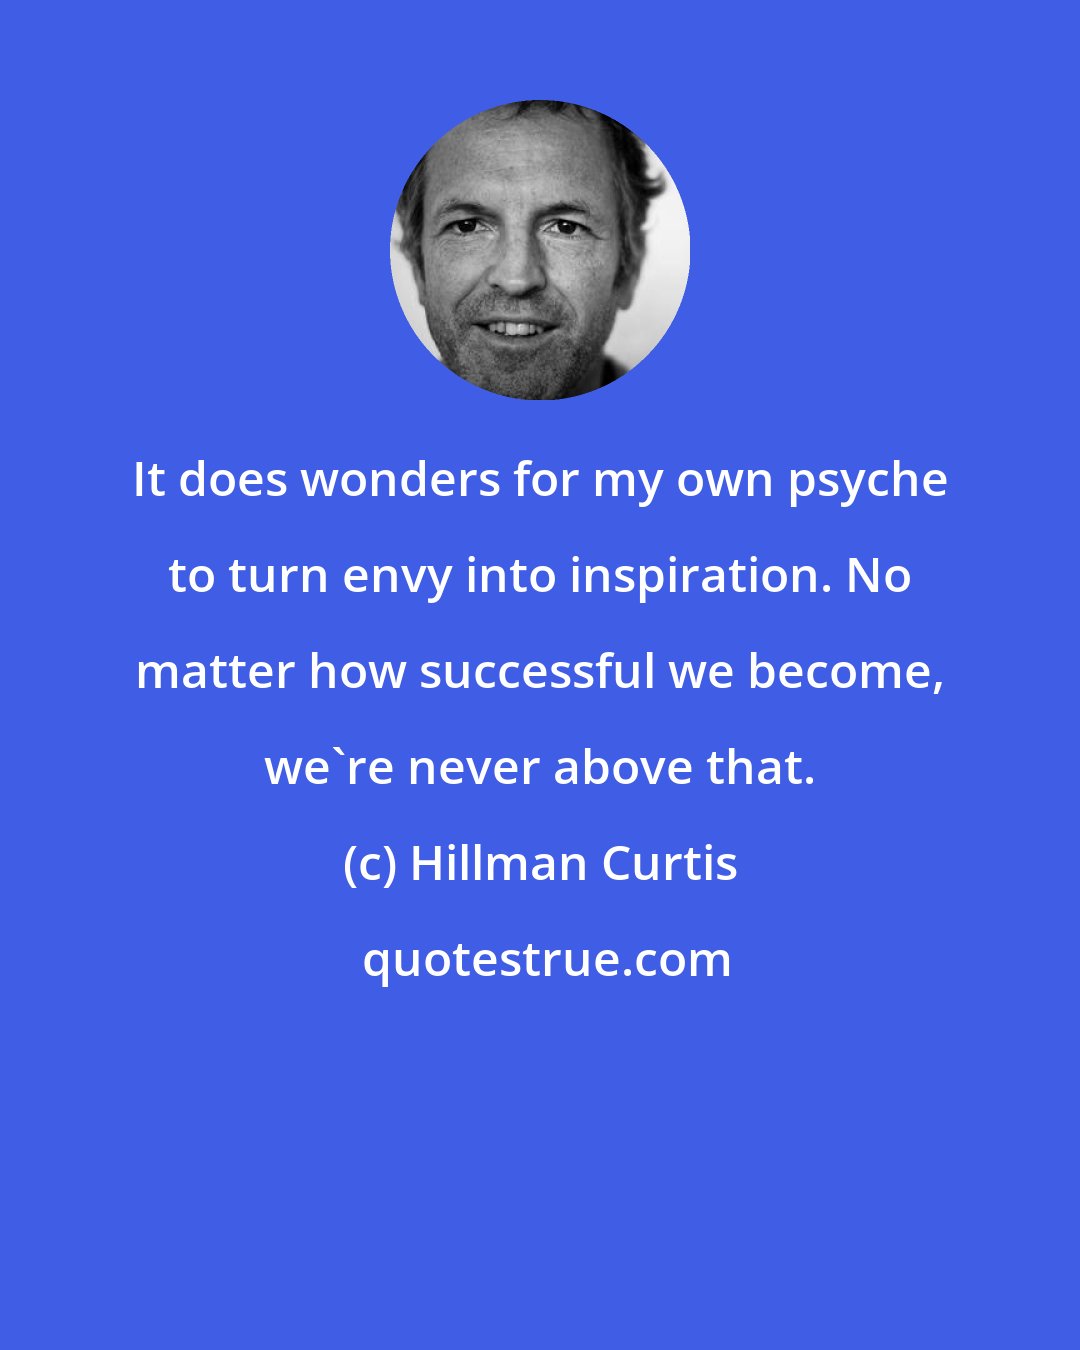 Hillman Curtis: It does wonders for my own psyche to turn envy into inspiration. No matter how successful we become, we're never above that.